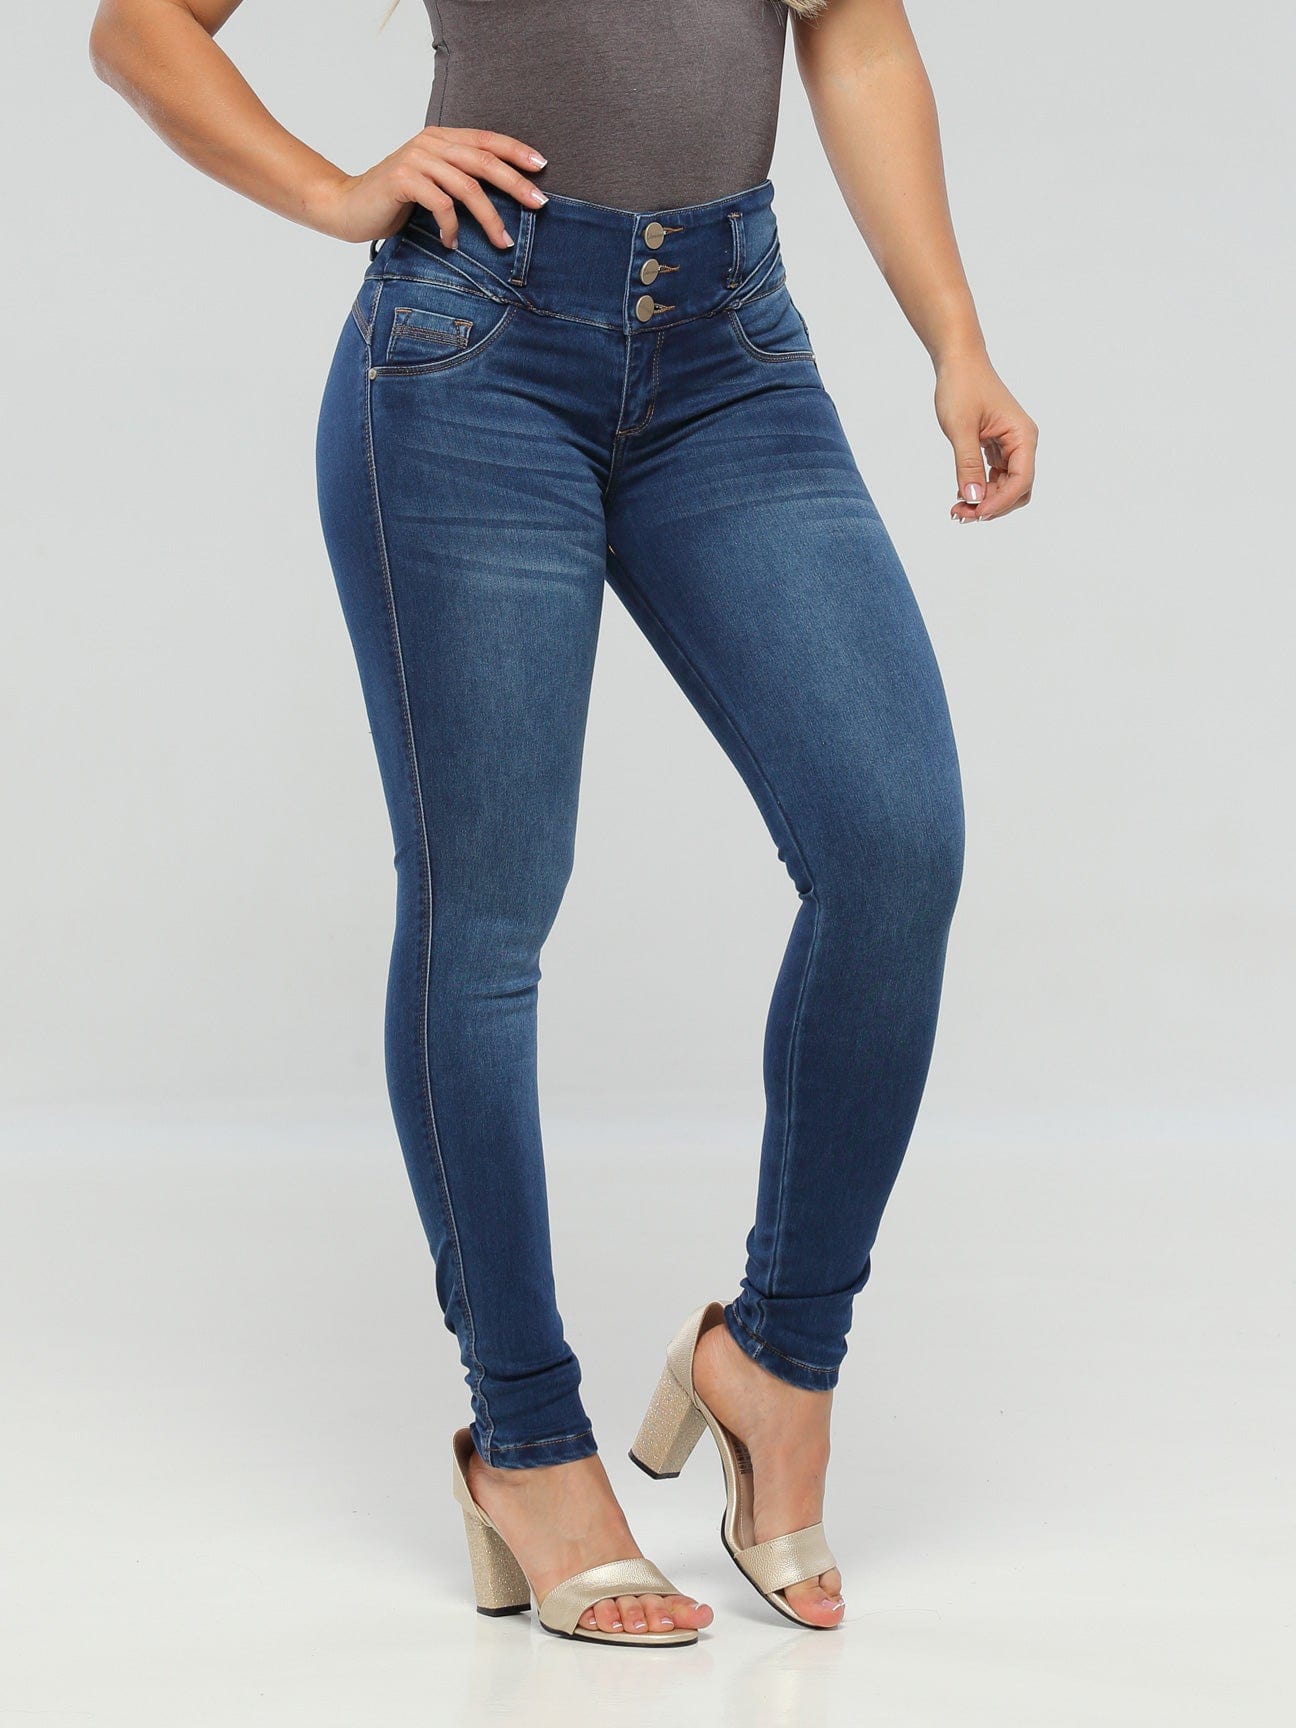 ENE2 JEANS COLOMBIANOS COLOMBIAN PUSH UP JEANS LEVANTA COLA BUTT LIFT -  Helia Beer Co